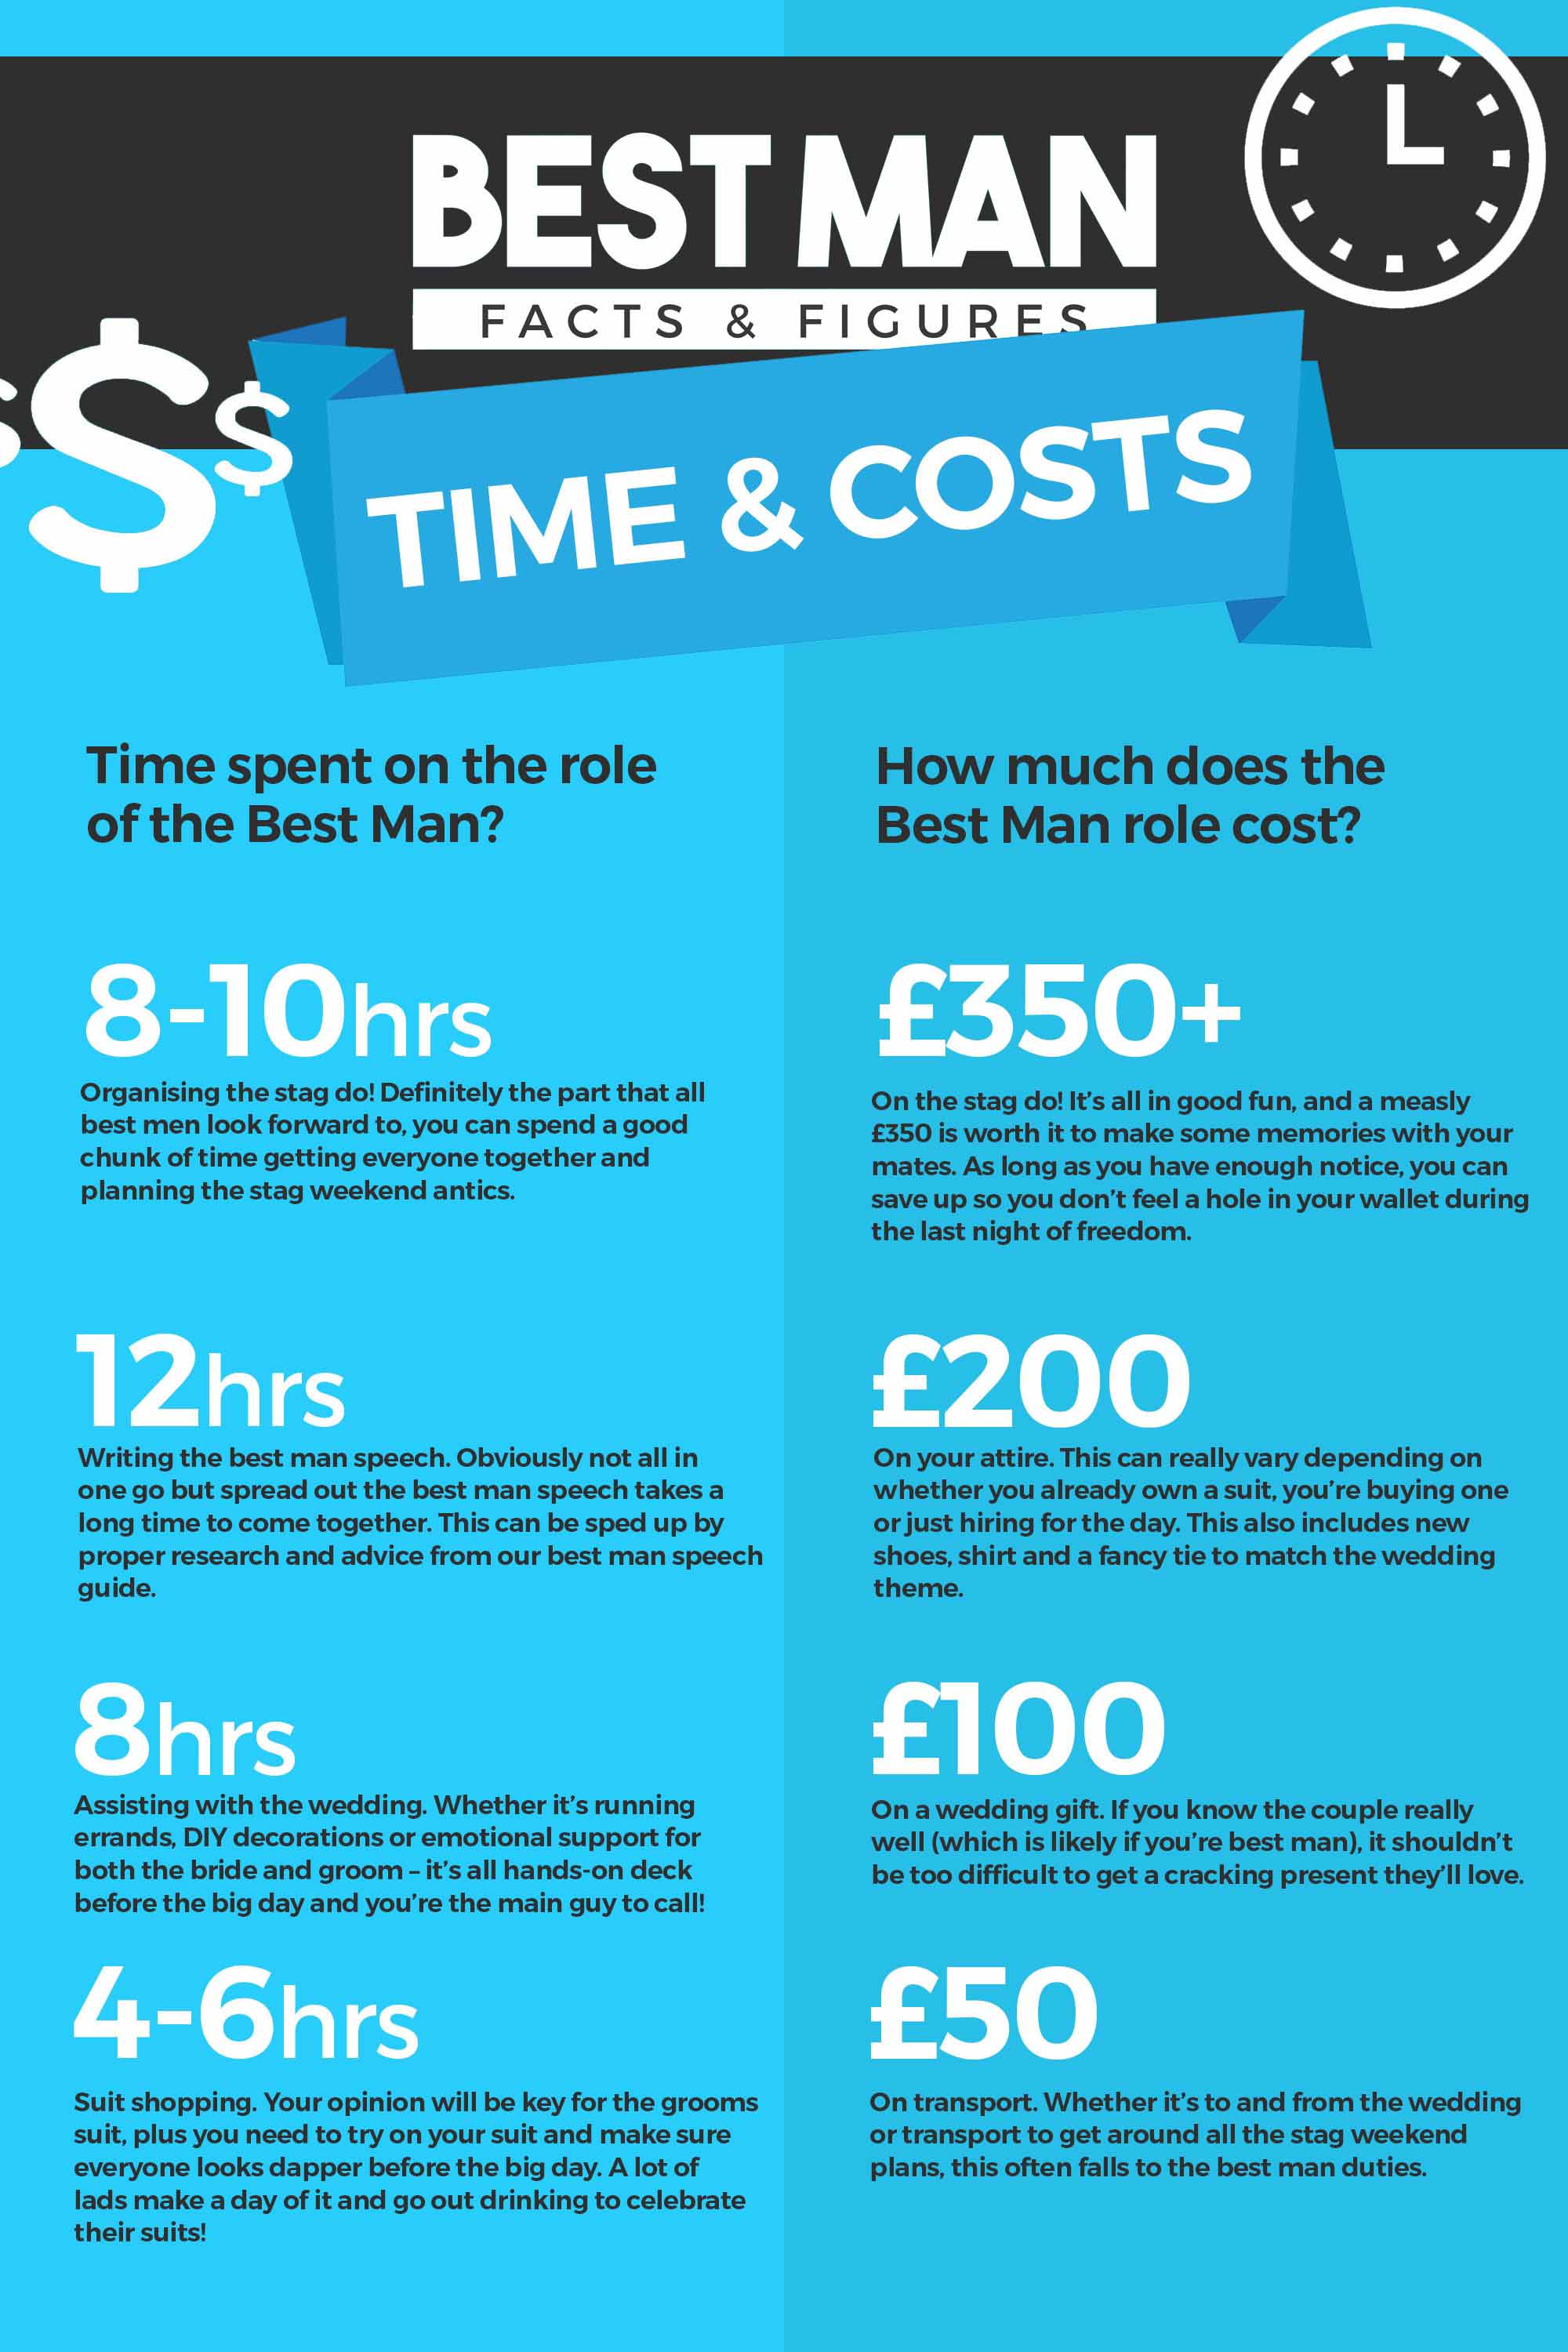 Best Man Facts & Figures - Time & Costs